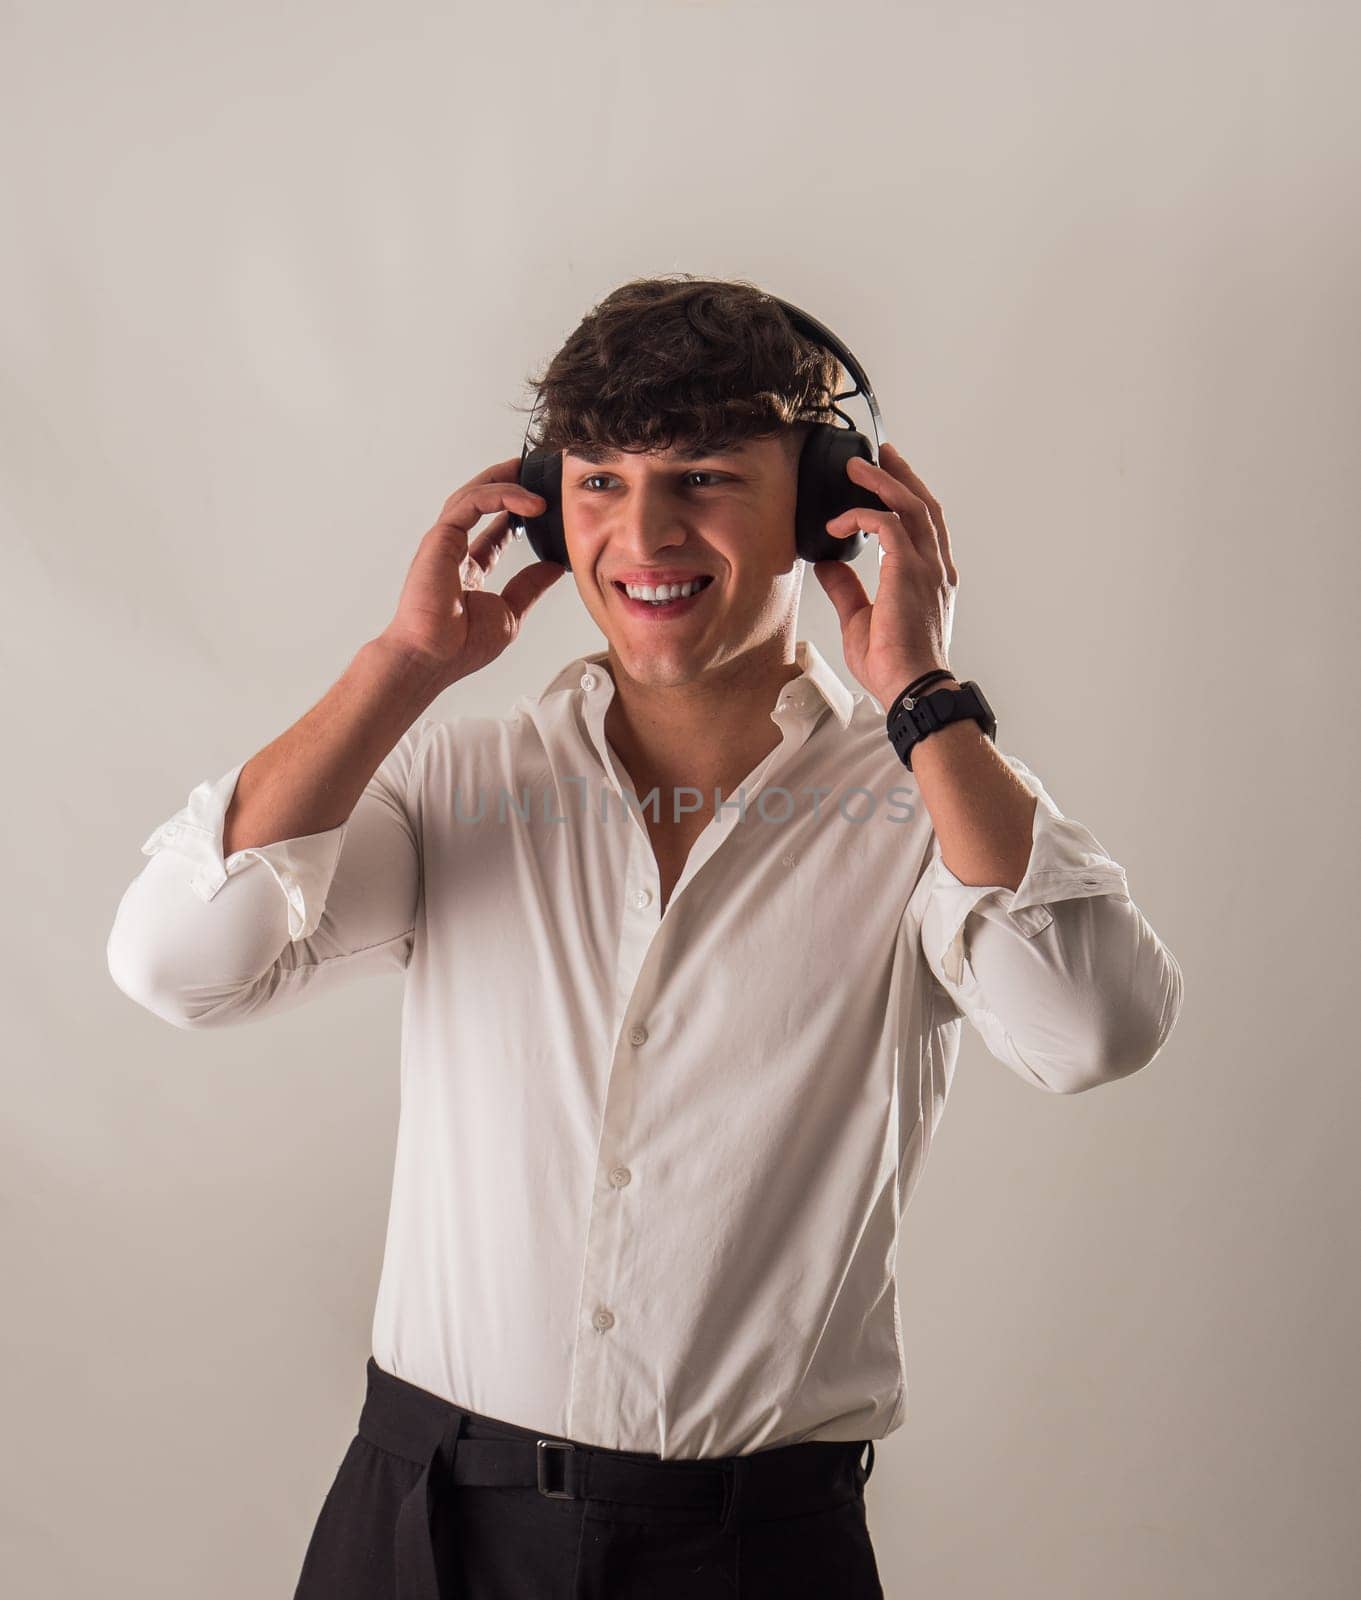 A young handsome man in a white shirt is listening to music on headphones, in studio shot